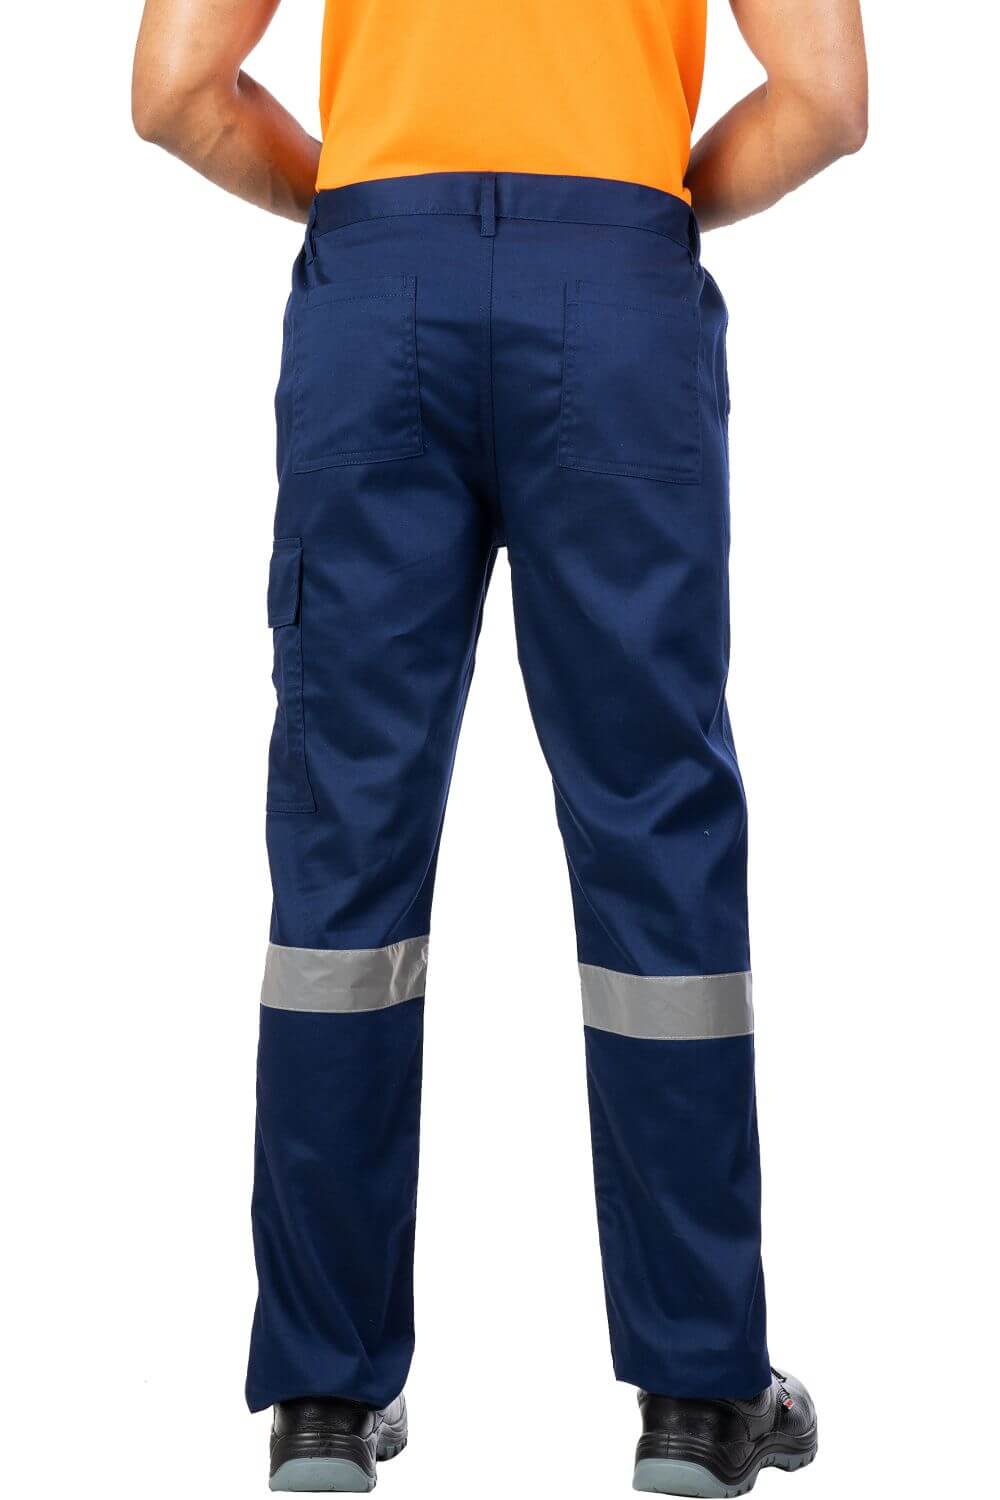 EN 20471 certified reflective tapes light weight industrial trouser.